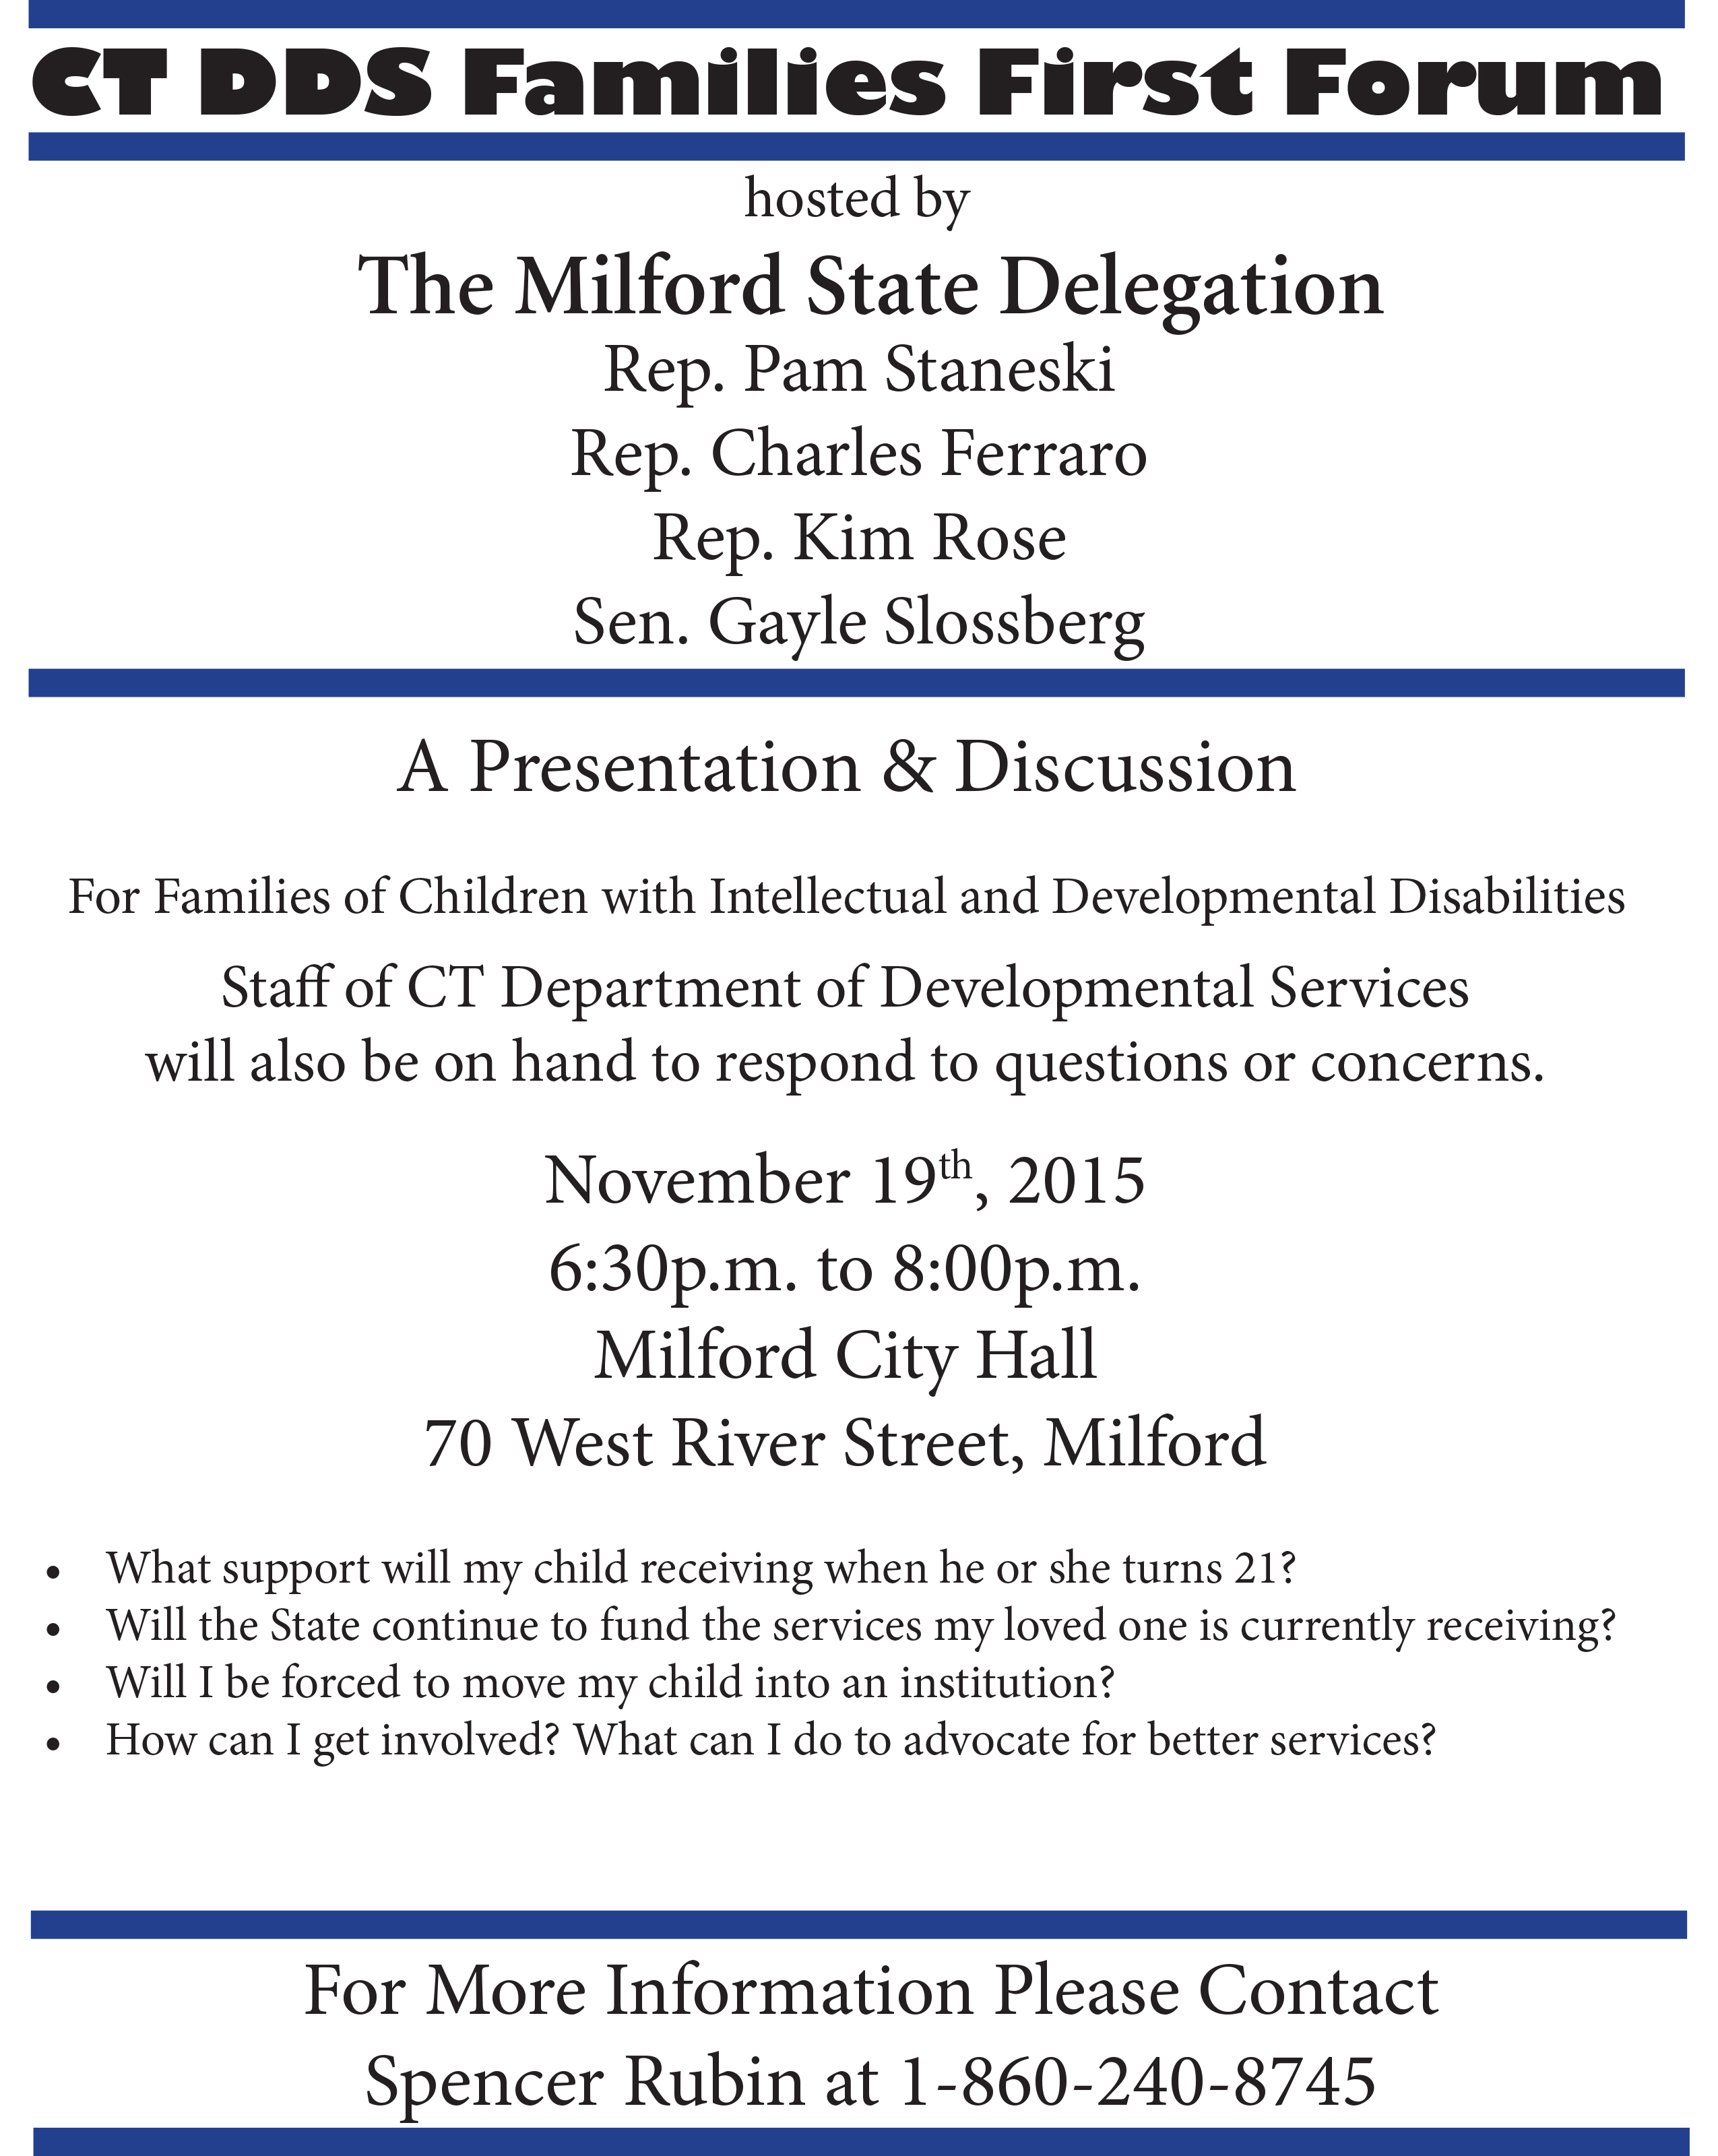 Milford Delegation Hosting Forum for Intellectual and Developmental